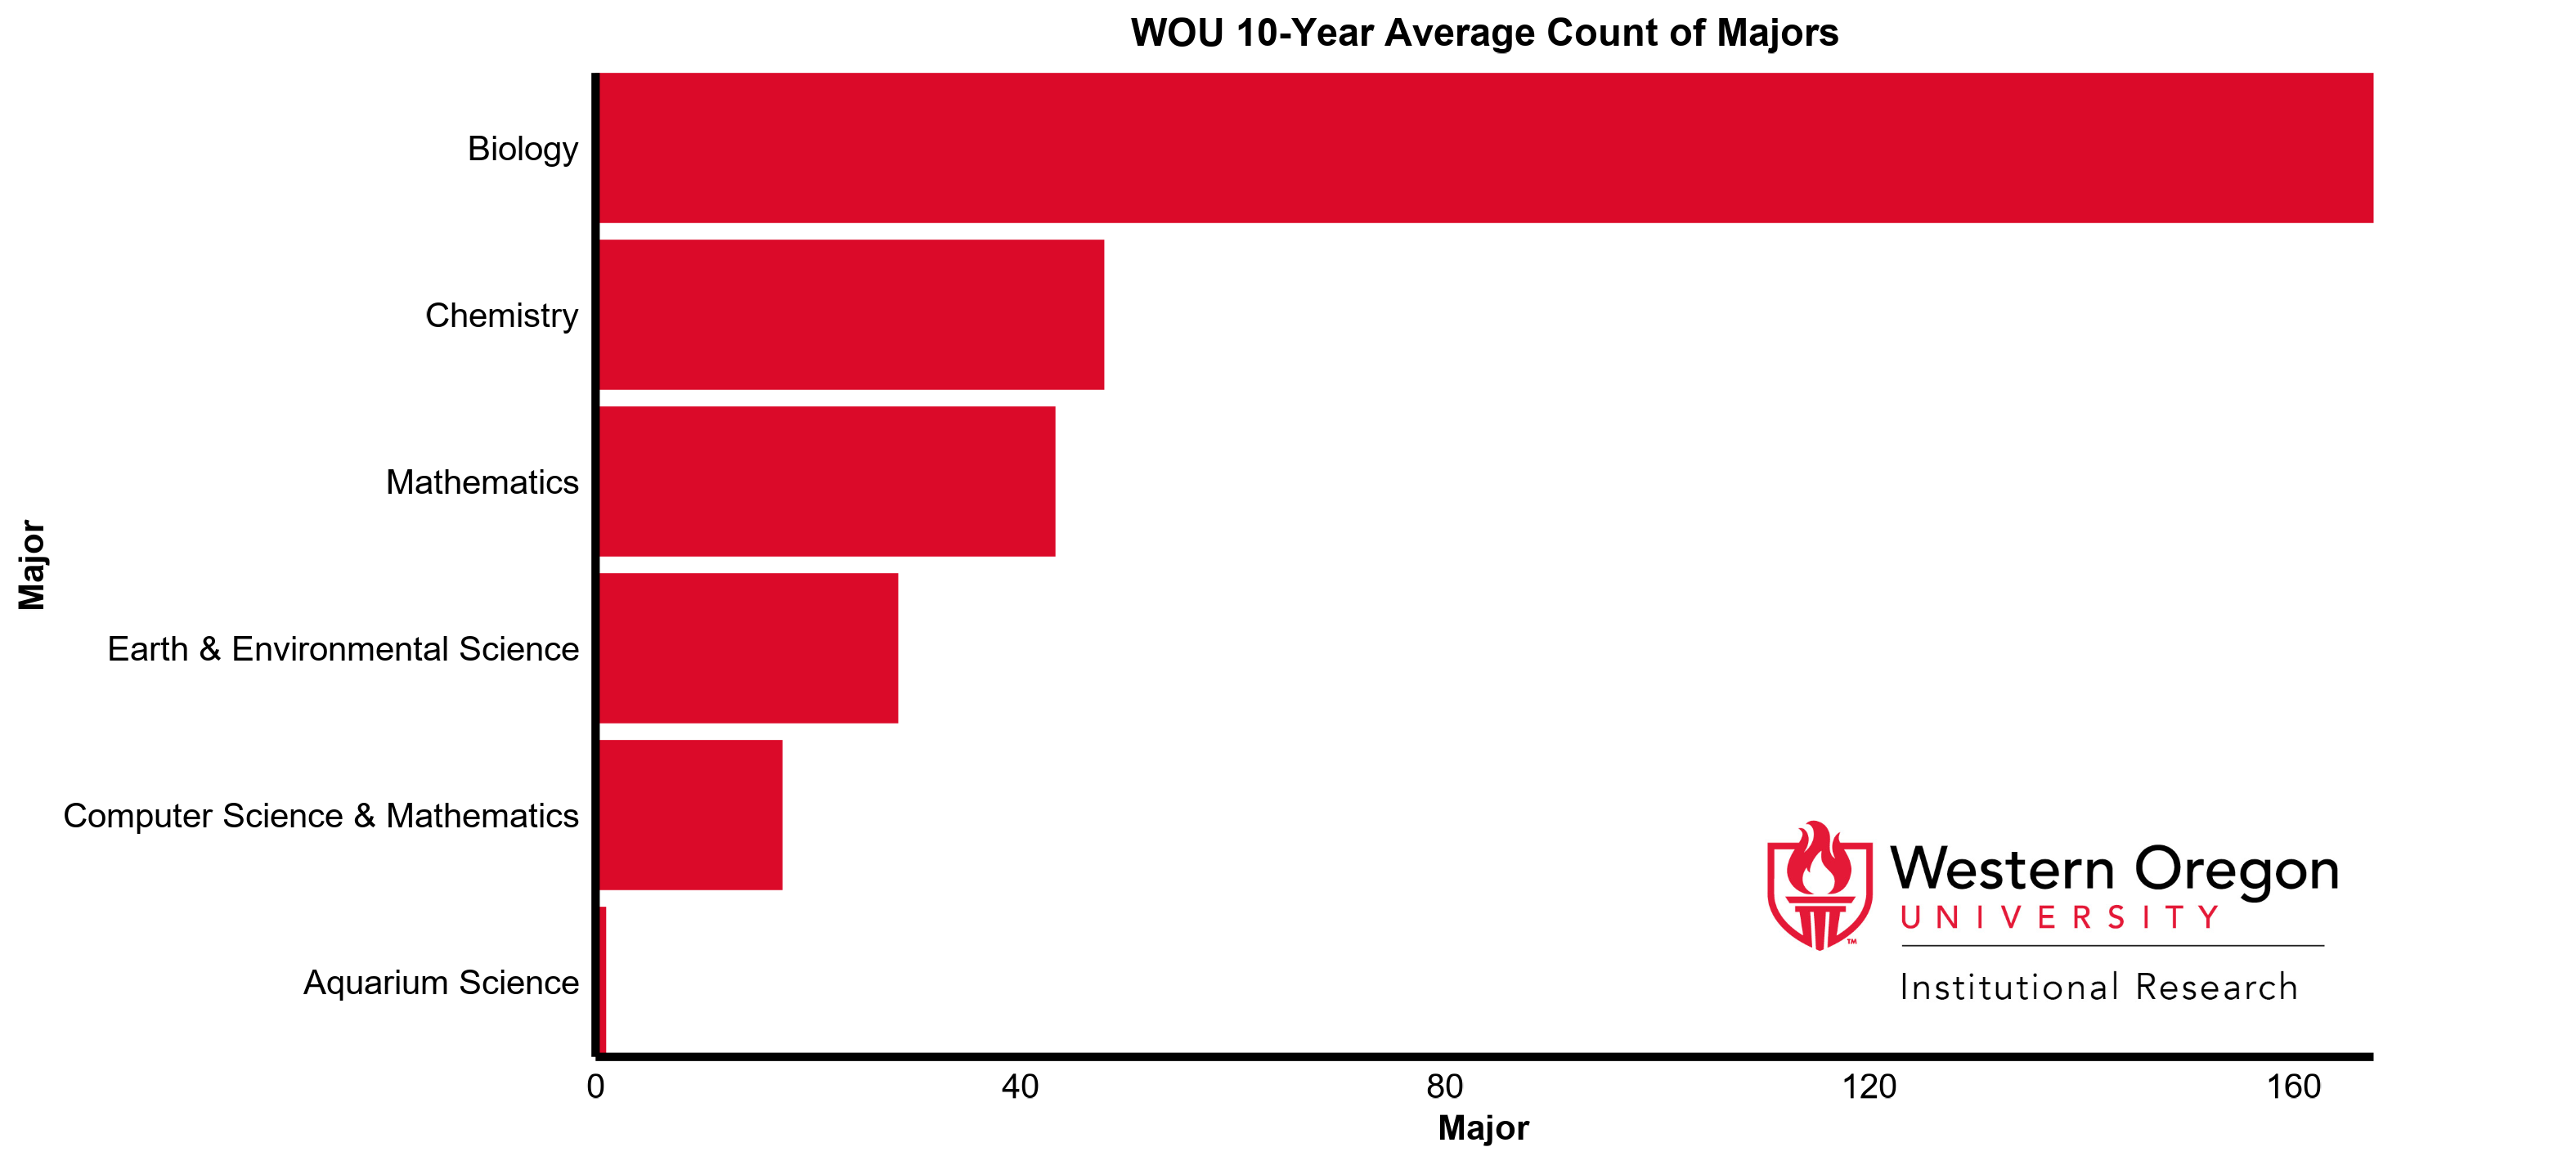 Bar graph of the 10-year average count of majors at WOU for the Natural Sciences and Mathematics division